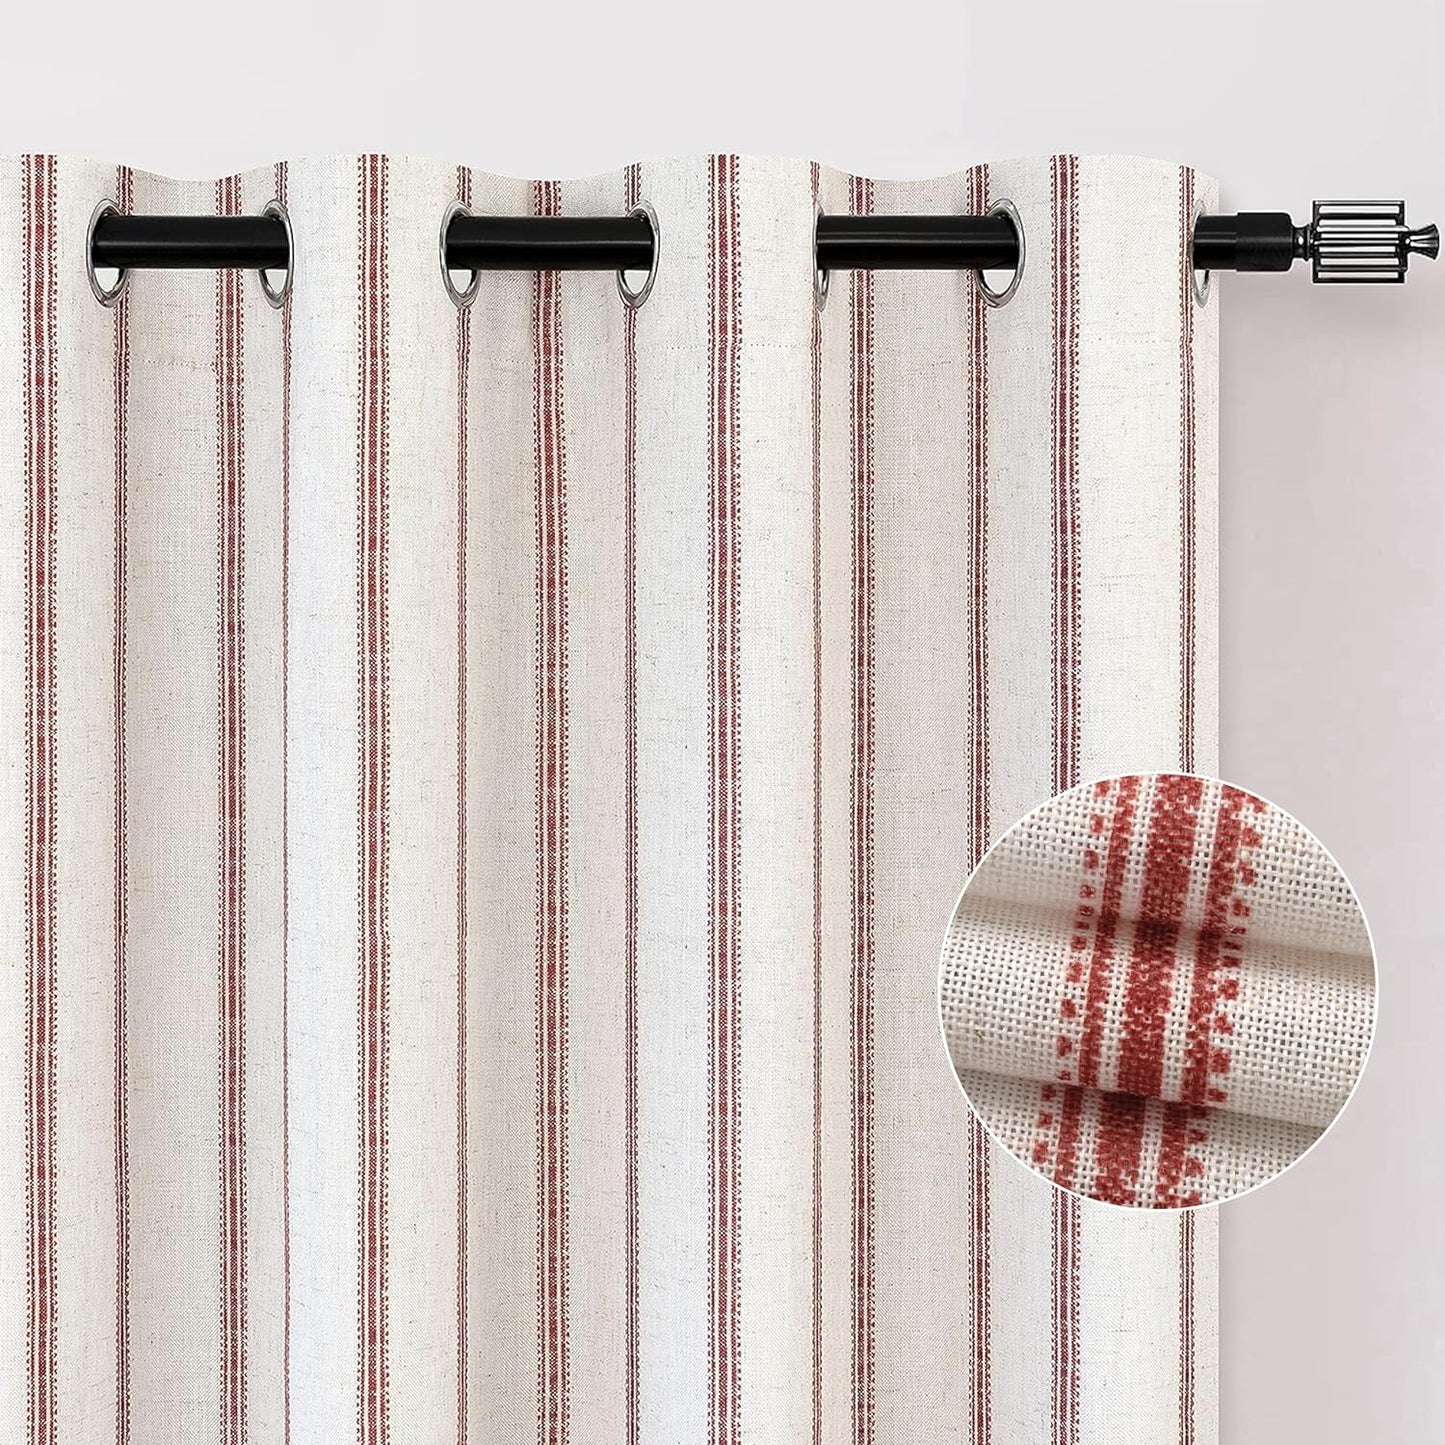 Driftaway Farmhouse Linen Blend Blackout Curtains 84 Inches Long for Bedroom Vertical Striped Printed Linen Curtains Thermal Insulated Grommet Lined Treatments for Living Room 2 Panels W52 X L84 Grey  DriftAway Red 52"X96" 